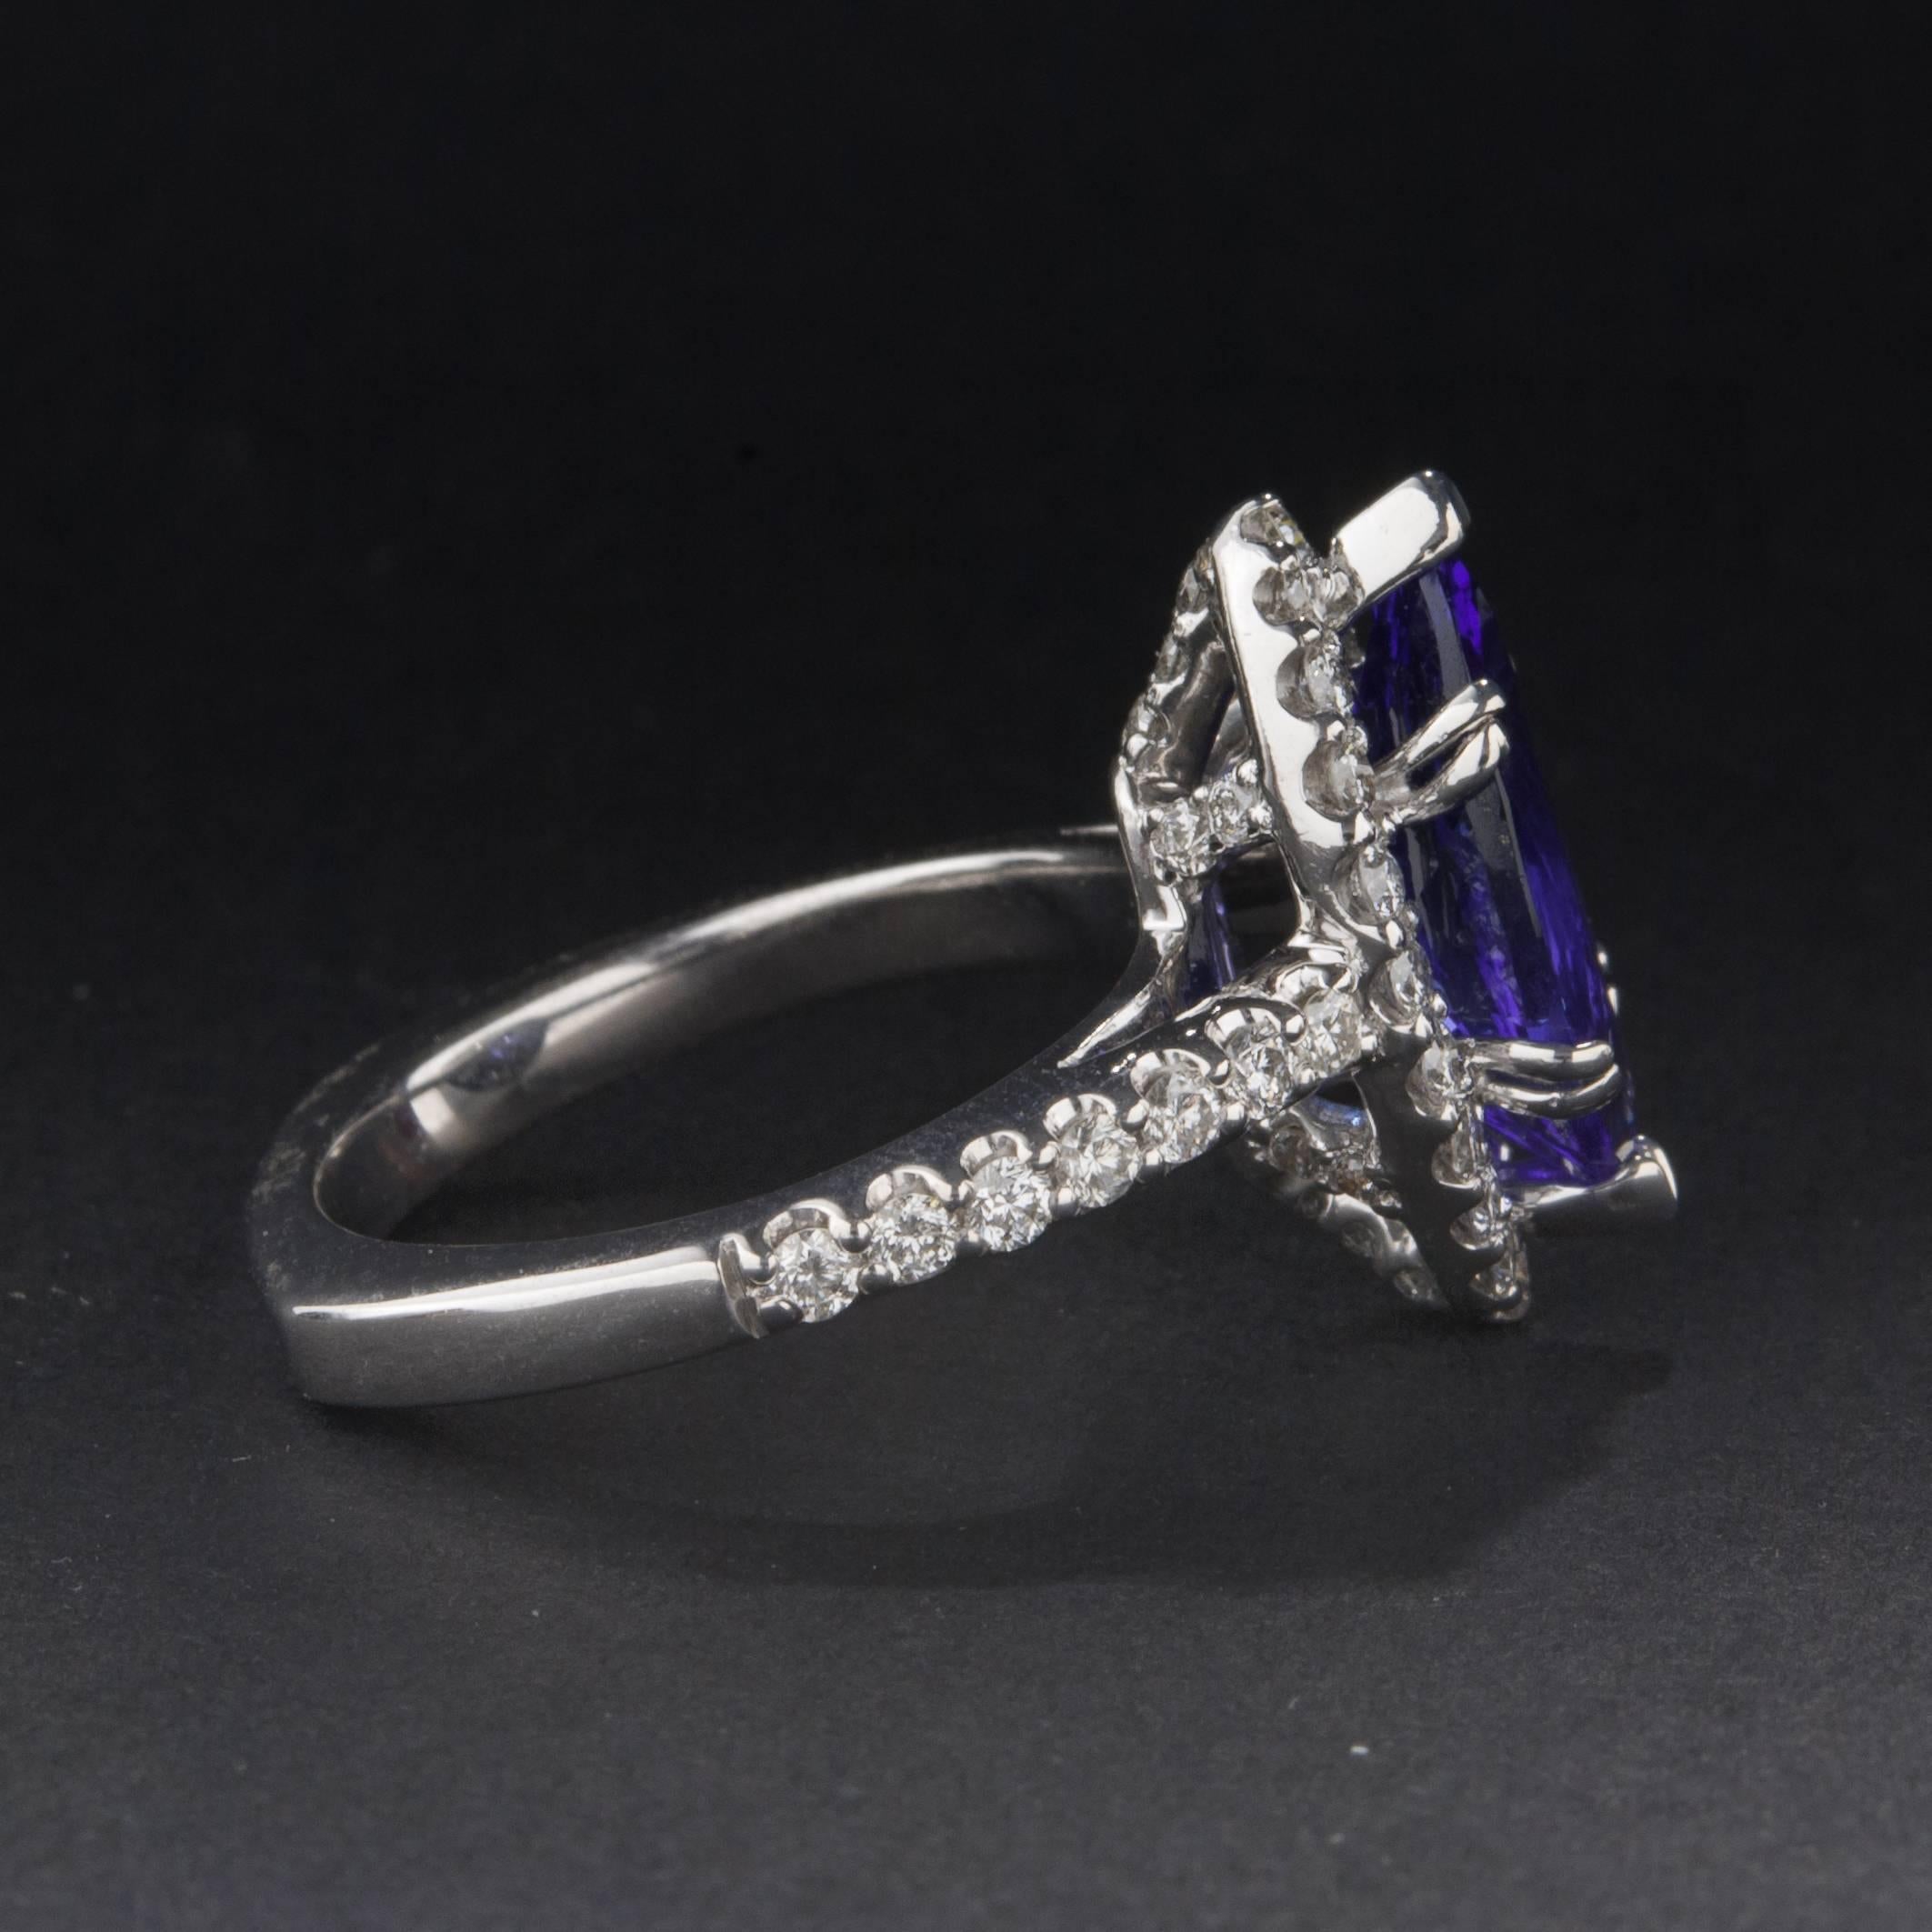 2.83ct Marquise Cut Tanzanite and Diamond Ring In Excellent Condition For Sale In Carmel, CA